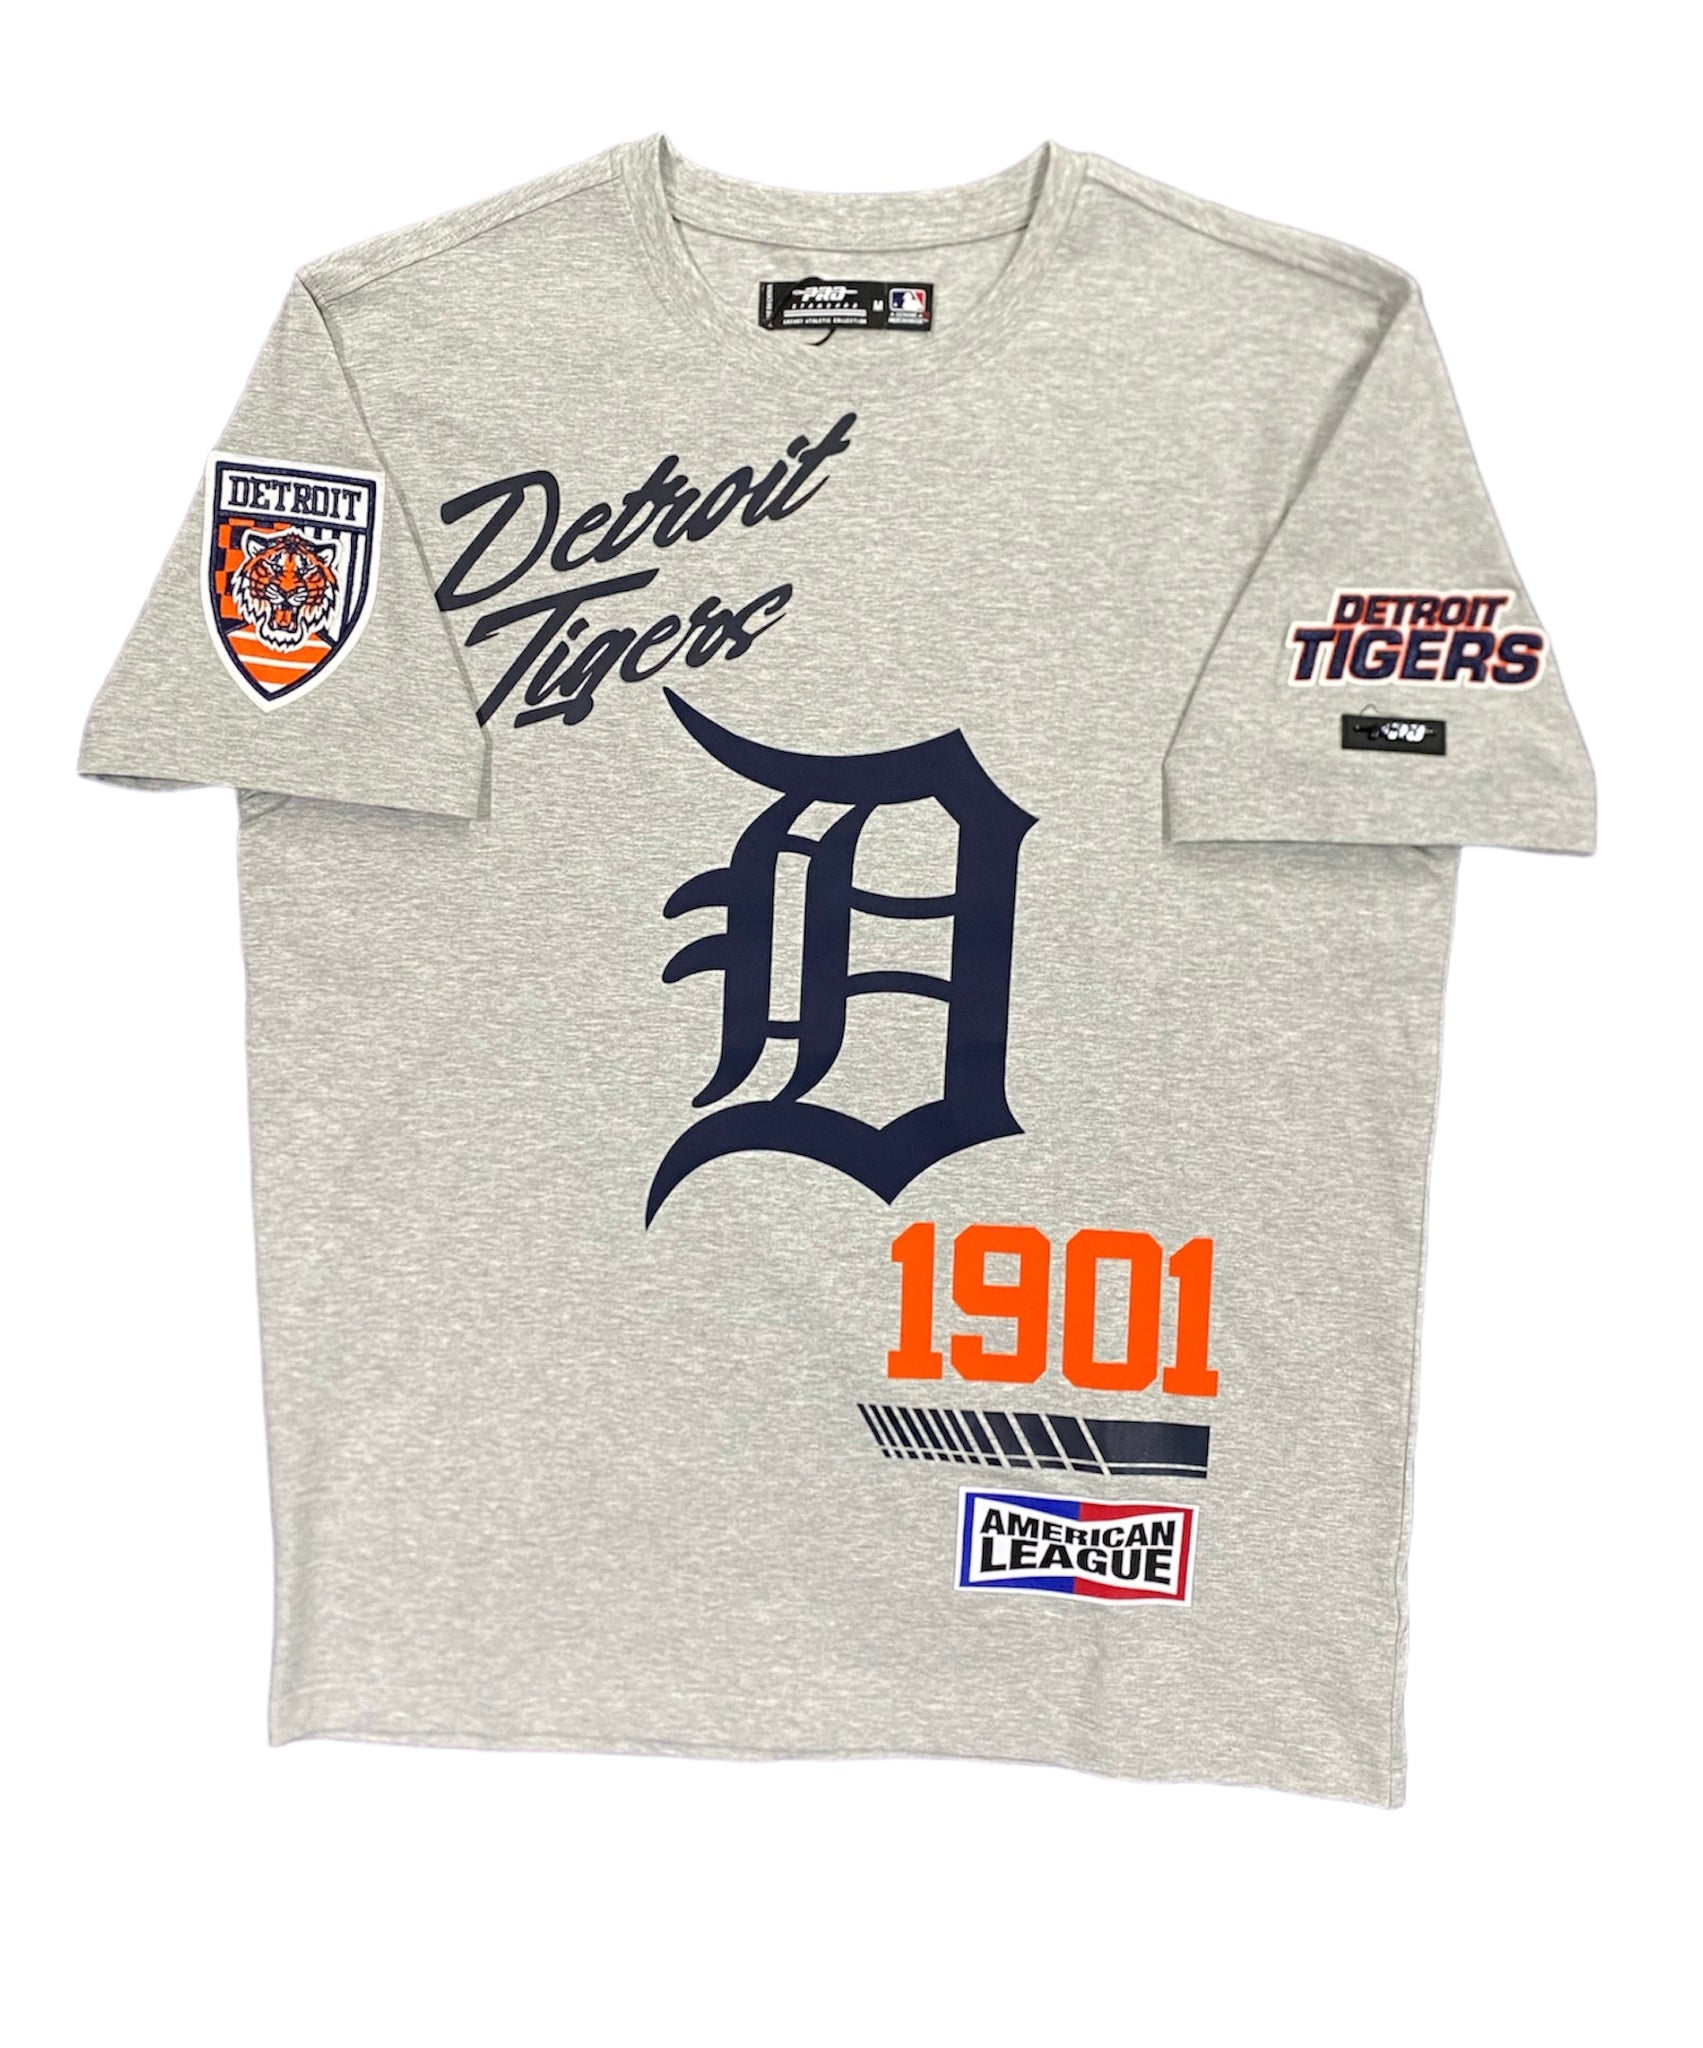 Pro Tigers 1901 Embroidered Logo Tee Gray